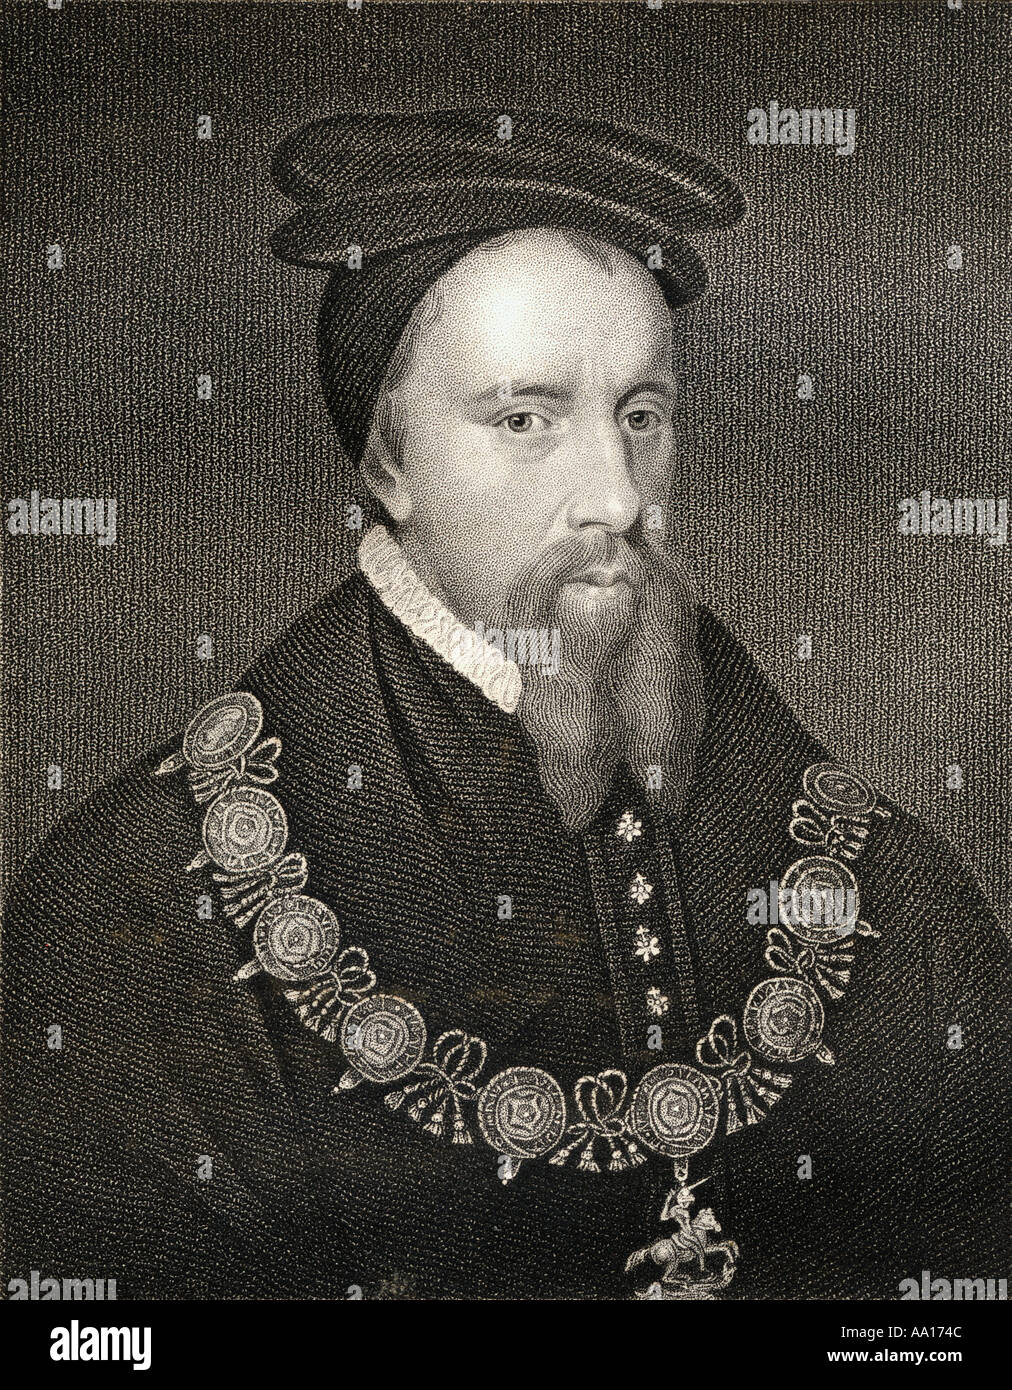 Thomas Stanley, 1st Earl of Derby,1435 – 1504. English nobleman and politician, a prominent figure in the later stage of England's Wars of the Roses. Stock Photo